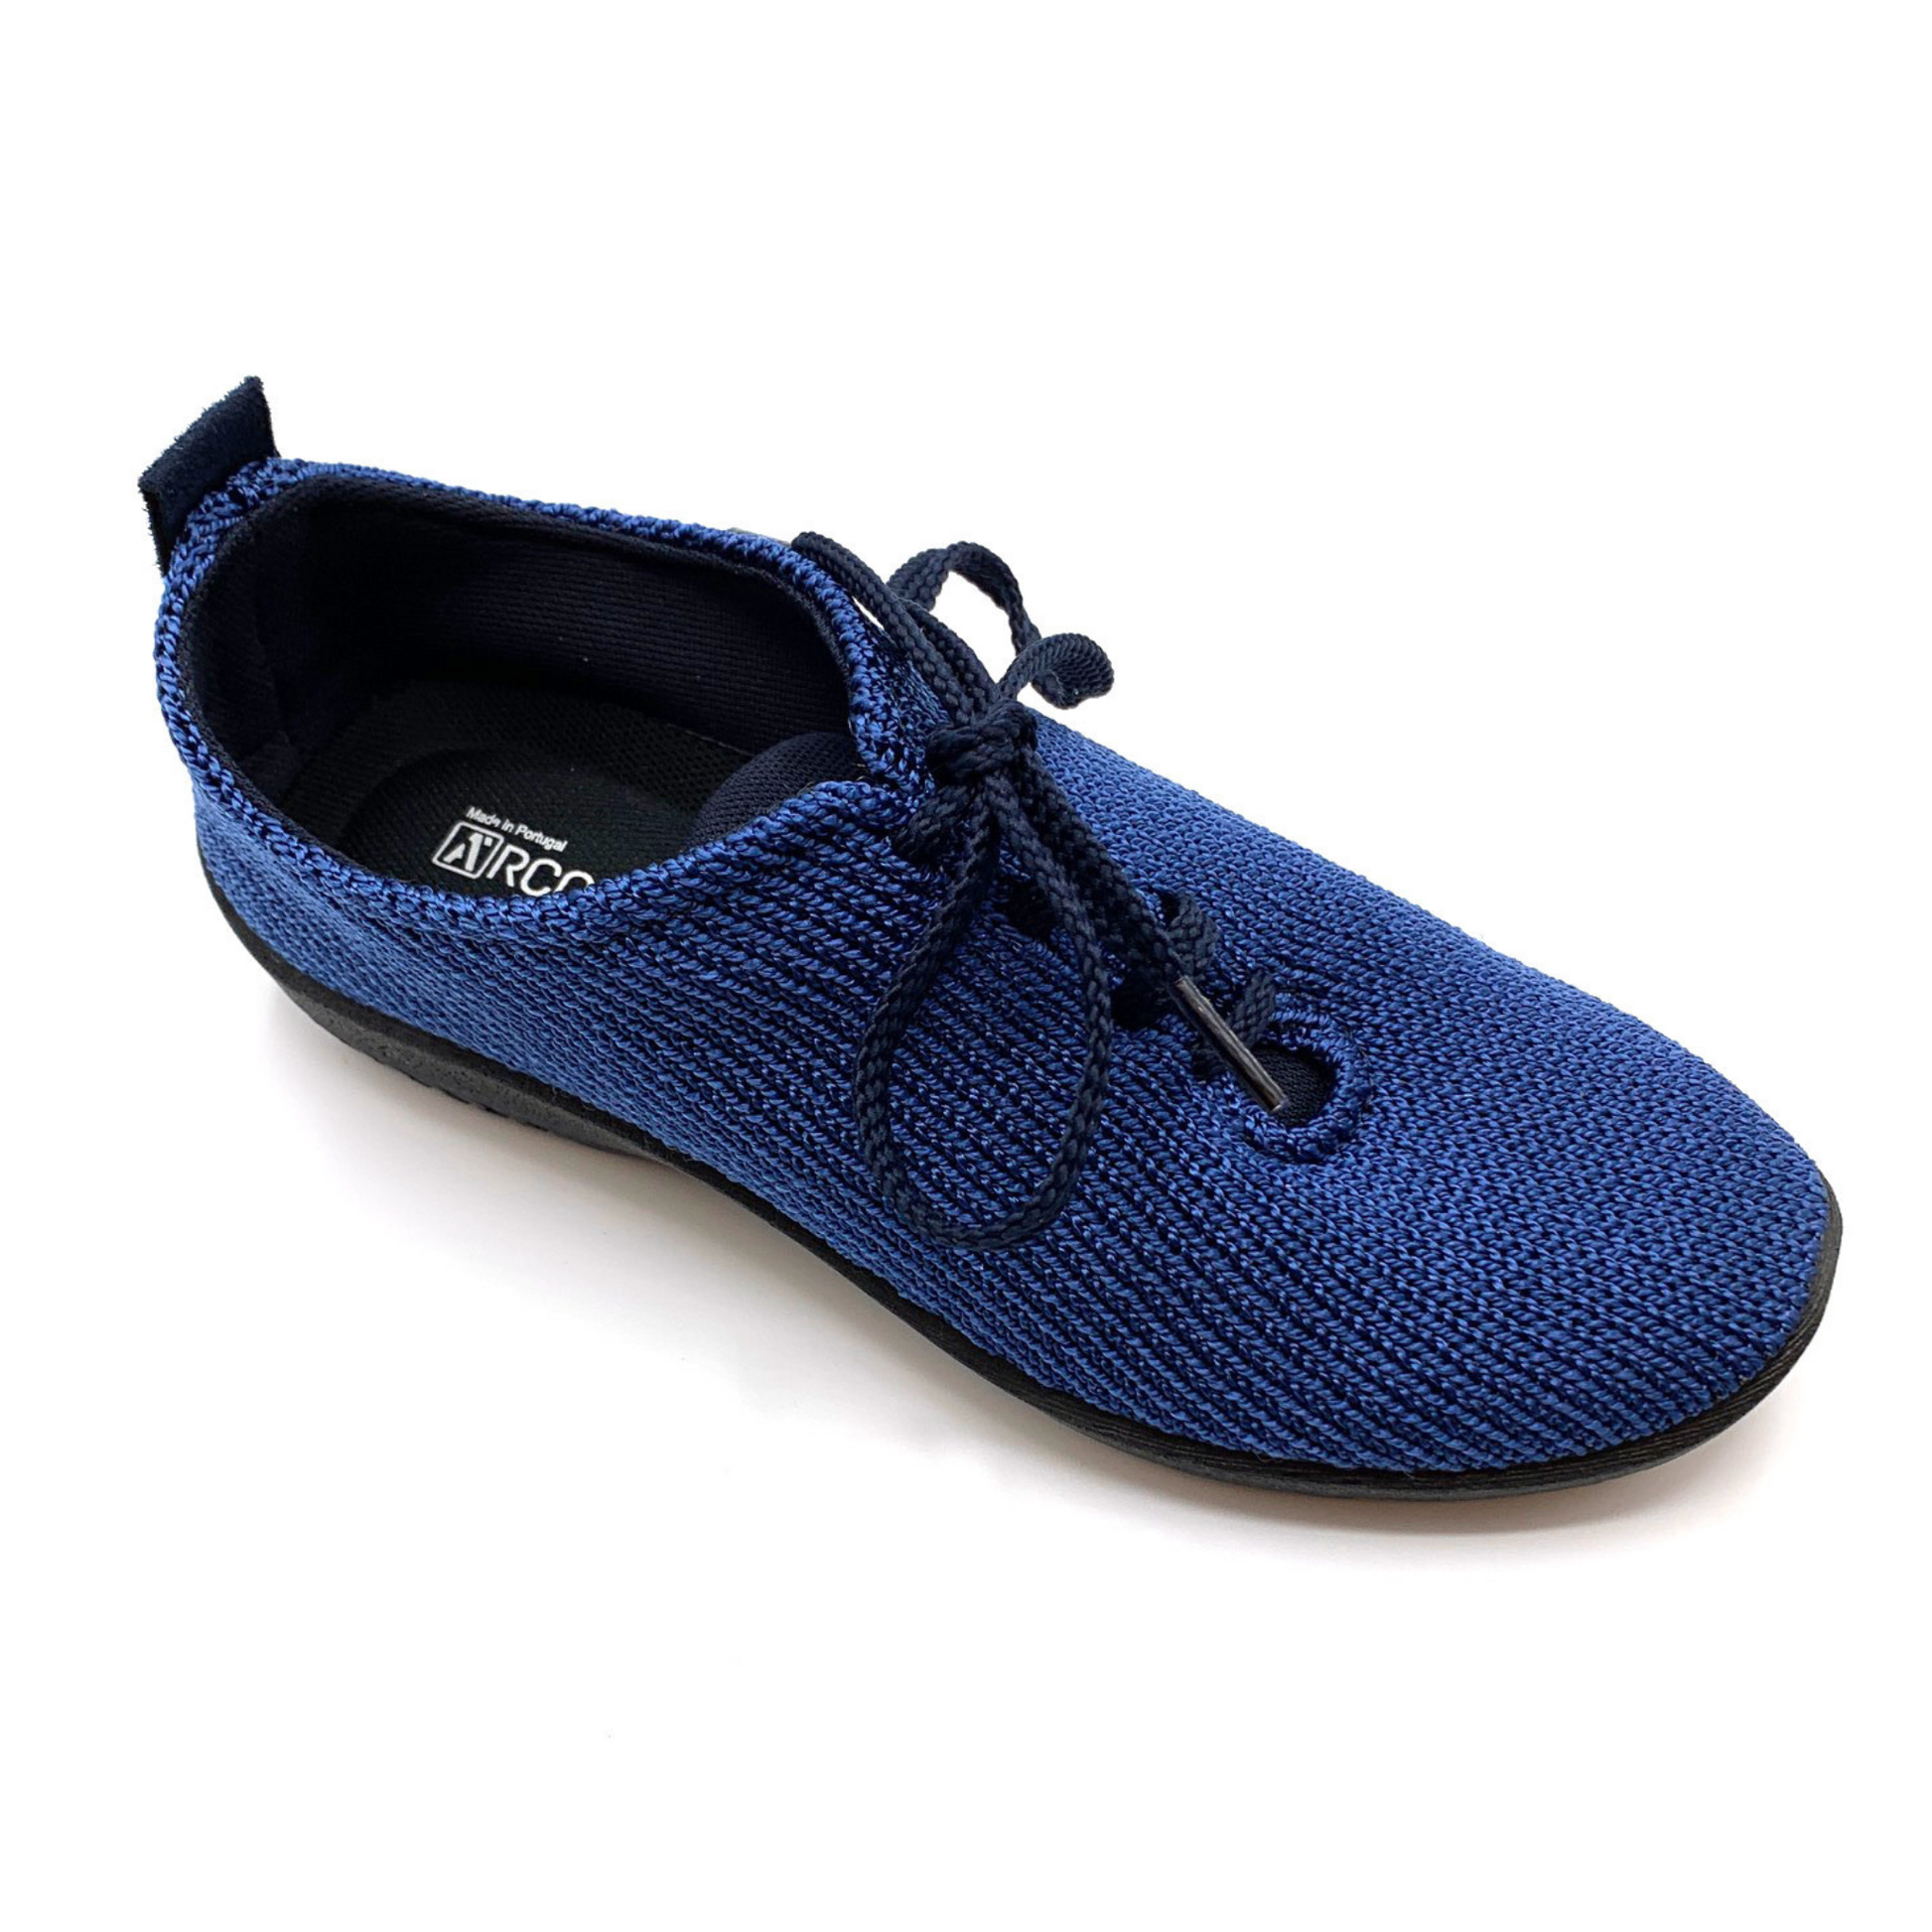 Dark blue sneaker pictured at angle featuring knit upper, black shoe strings, and black lining.